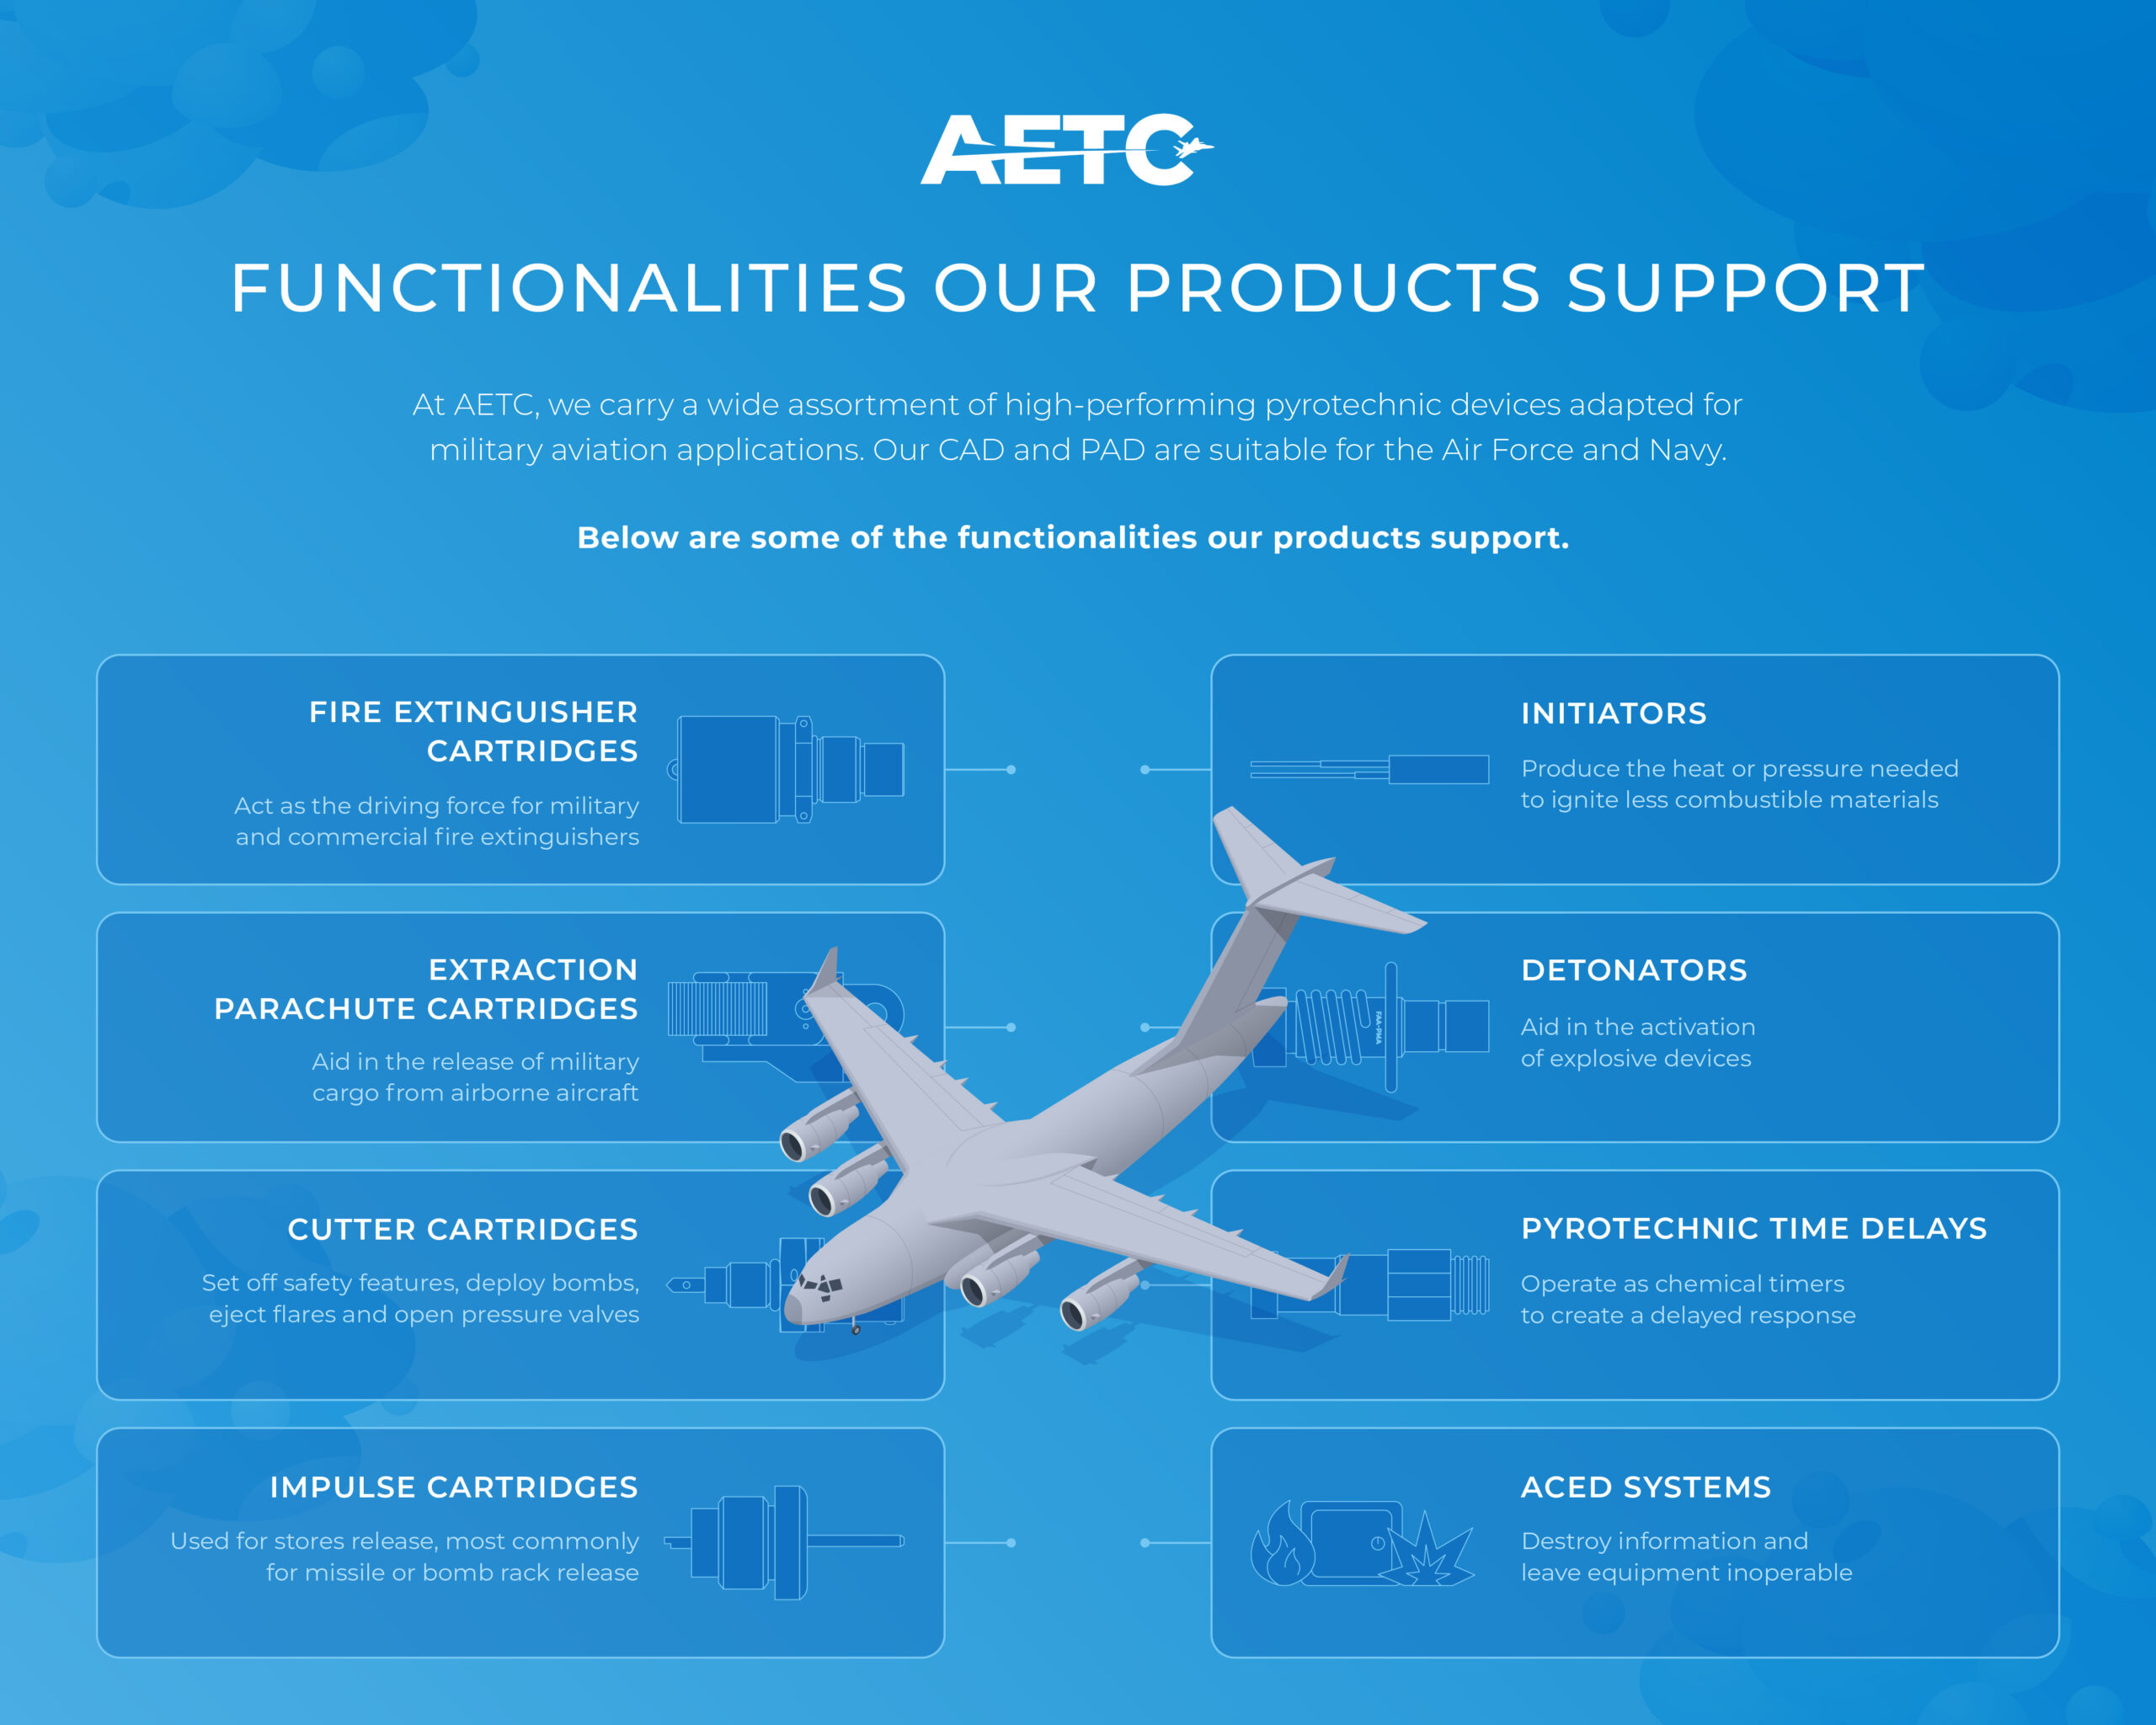 AETC products support military aviation